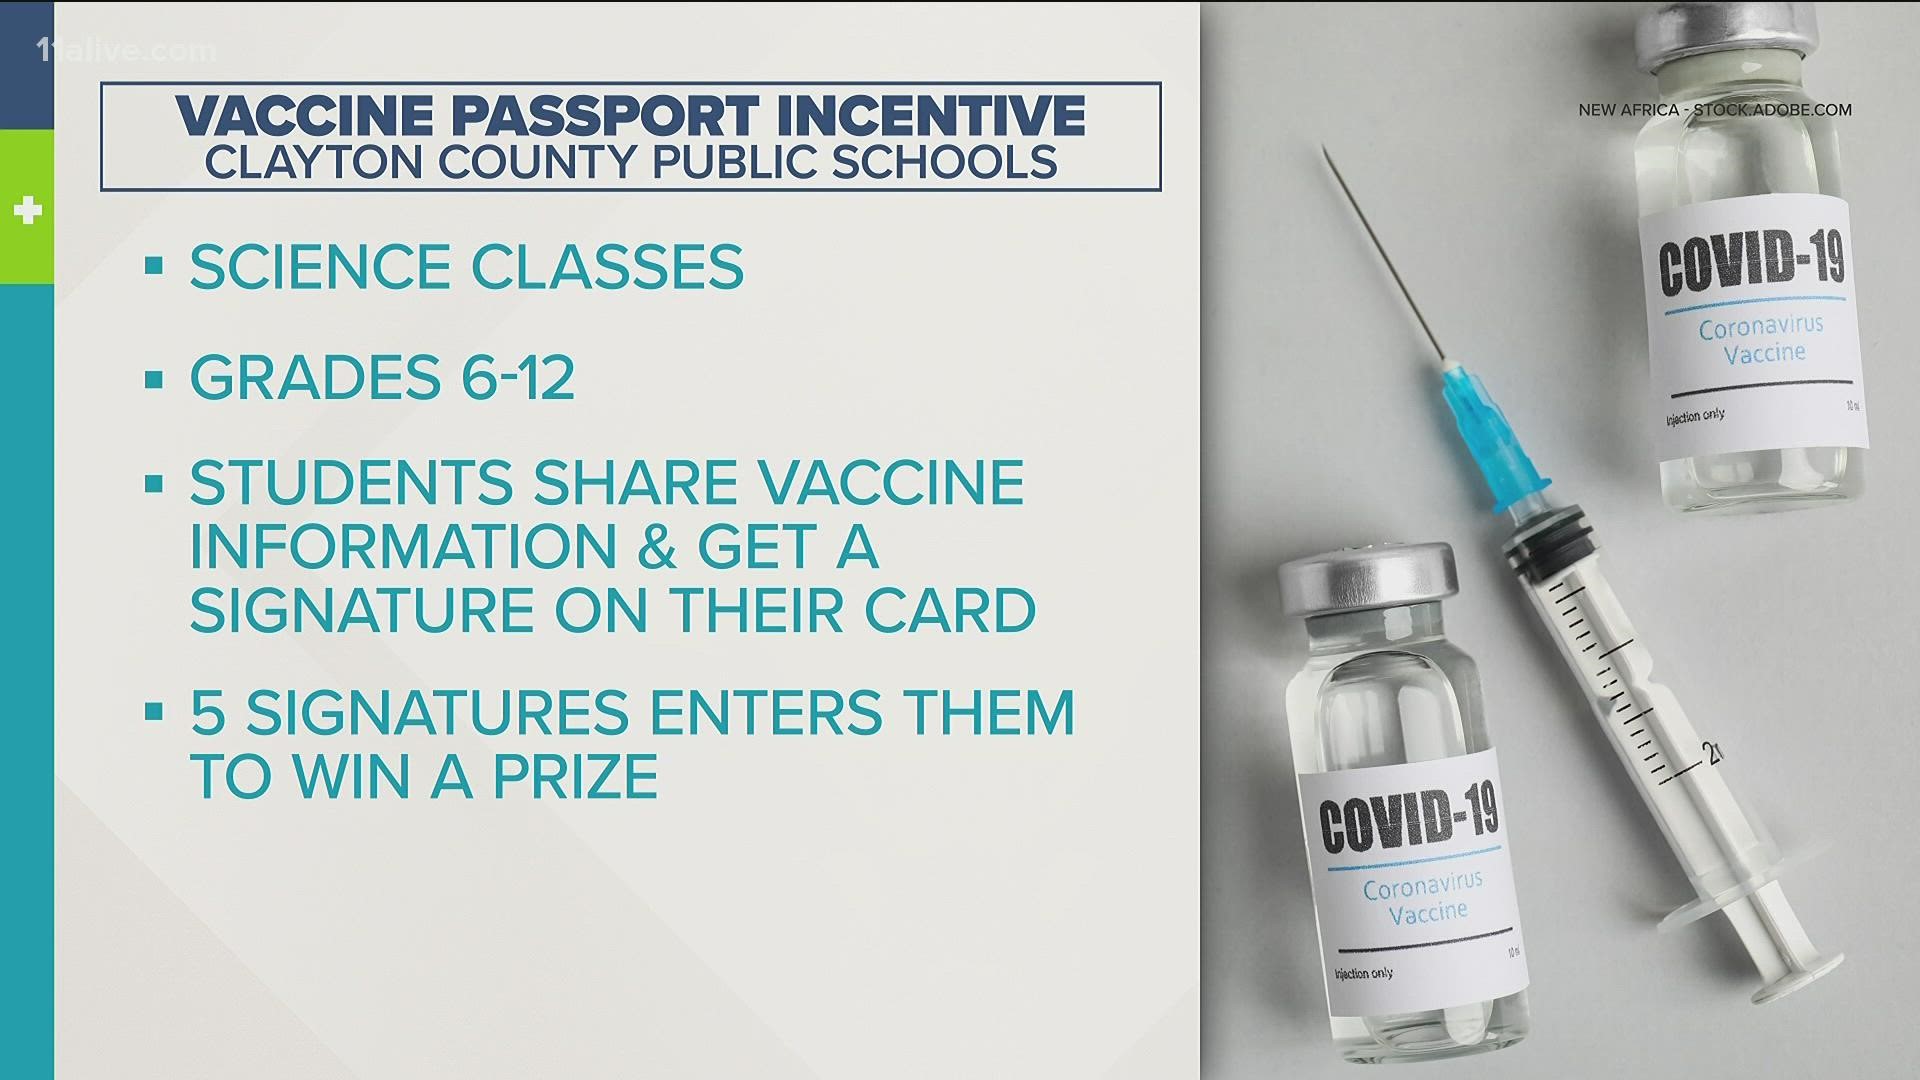 The plan is to get students to help spread the good word about COVID vaccines.